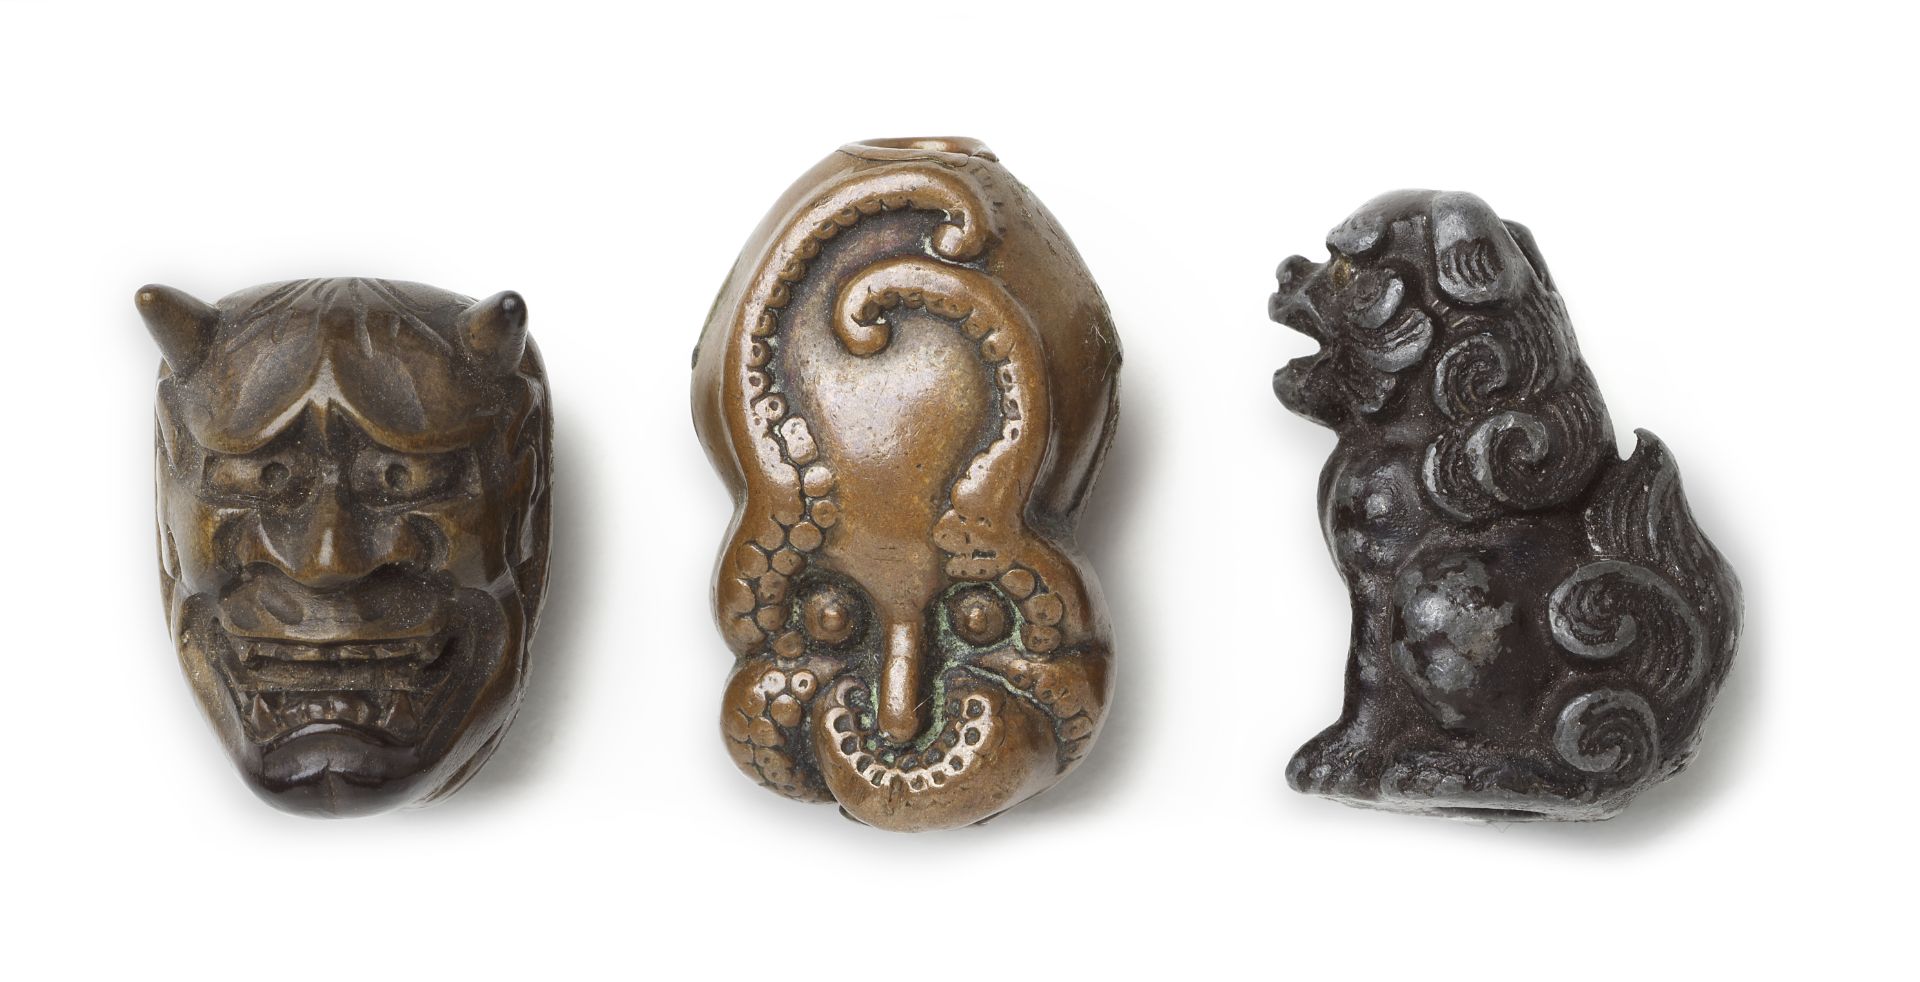 THREE OJIME OF DIFFERENT MATERIALS Meiji era (1868-1912), late 19th/early 20th century (3)